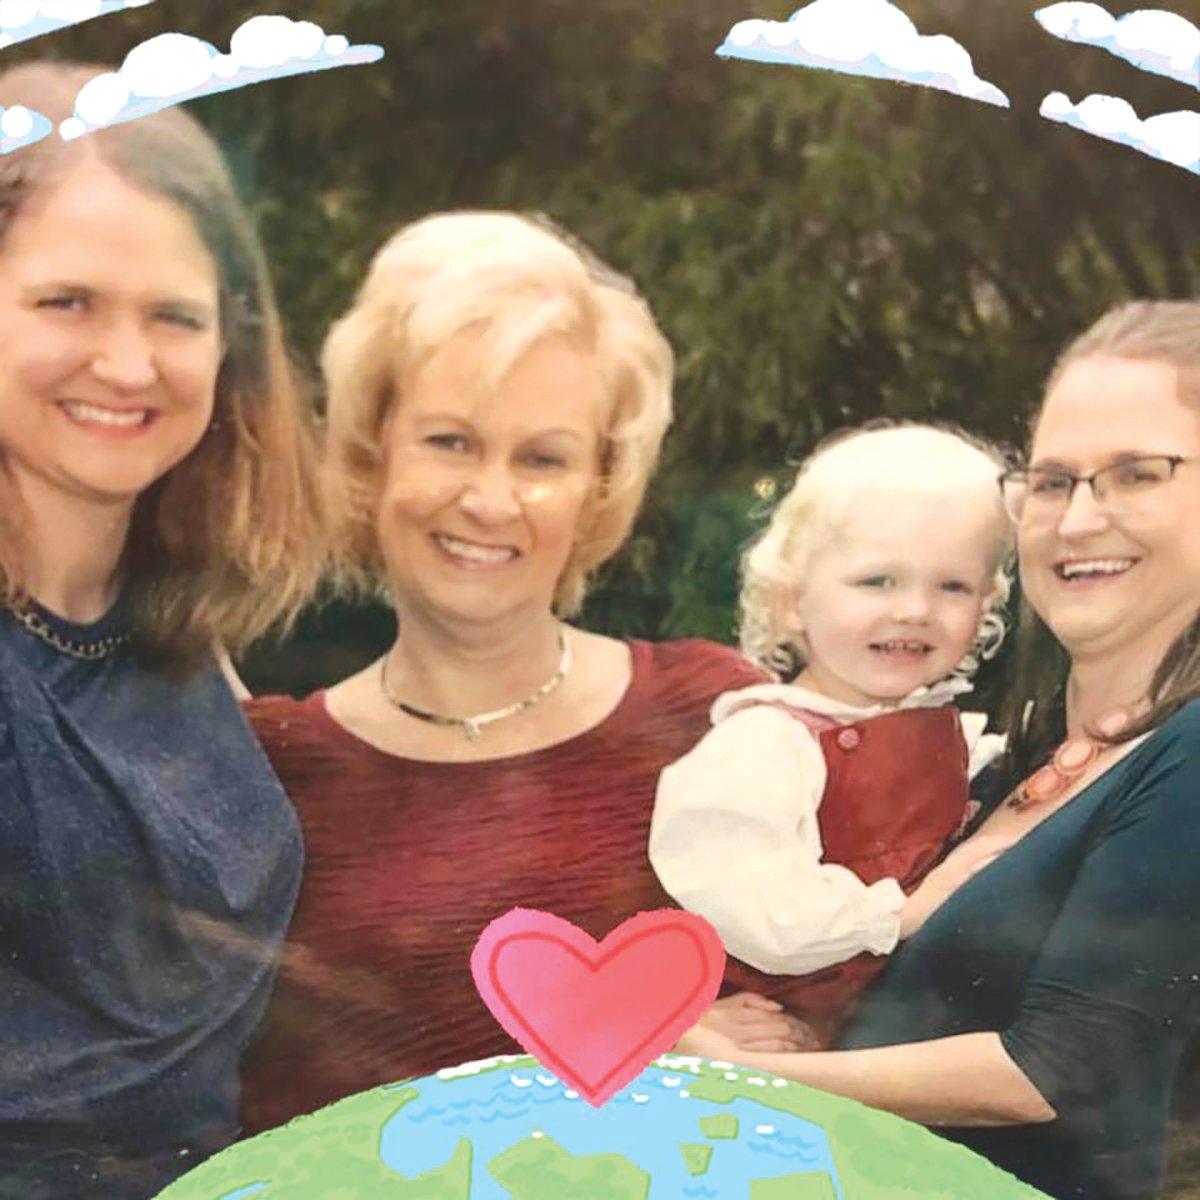 Toni Wiersma is pictured with her twin daughters and her grandchild.